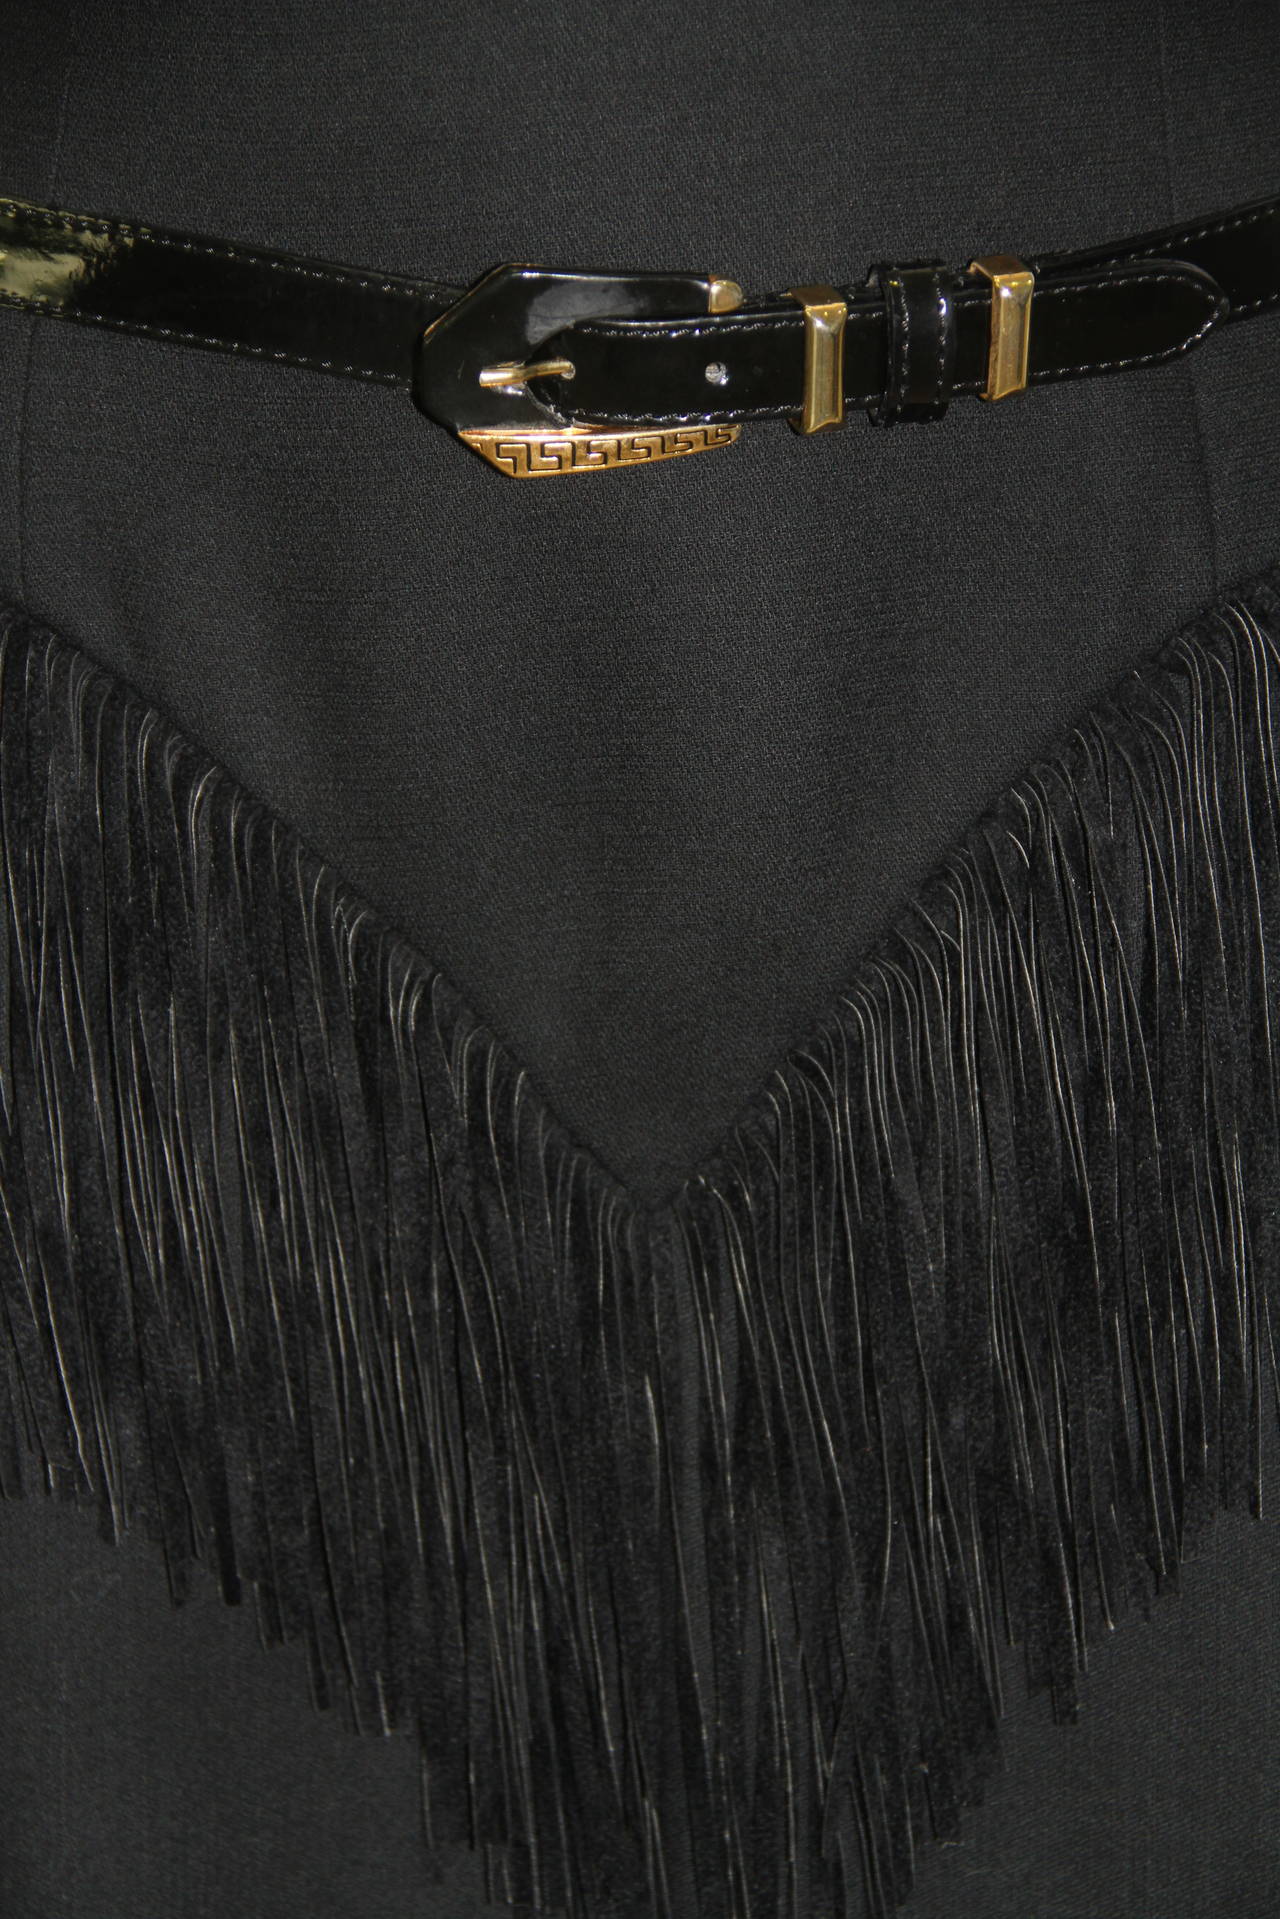 Very rare Atelier Versace black wool and suede leather fringed cowgirl skirt from the Fall 1992 Haute Couture Bondage collection, shown at The Ritz in Paris.

The skirt features suede fringing, together with a black leather belt, featuring Greca